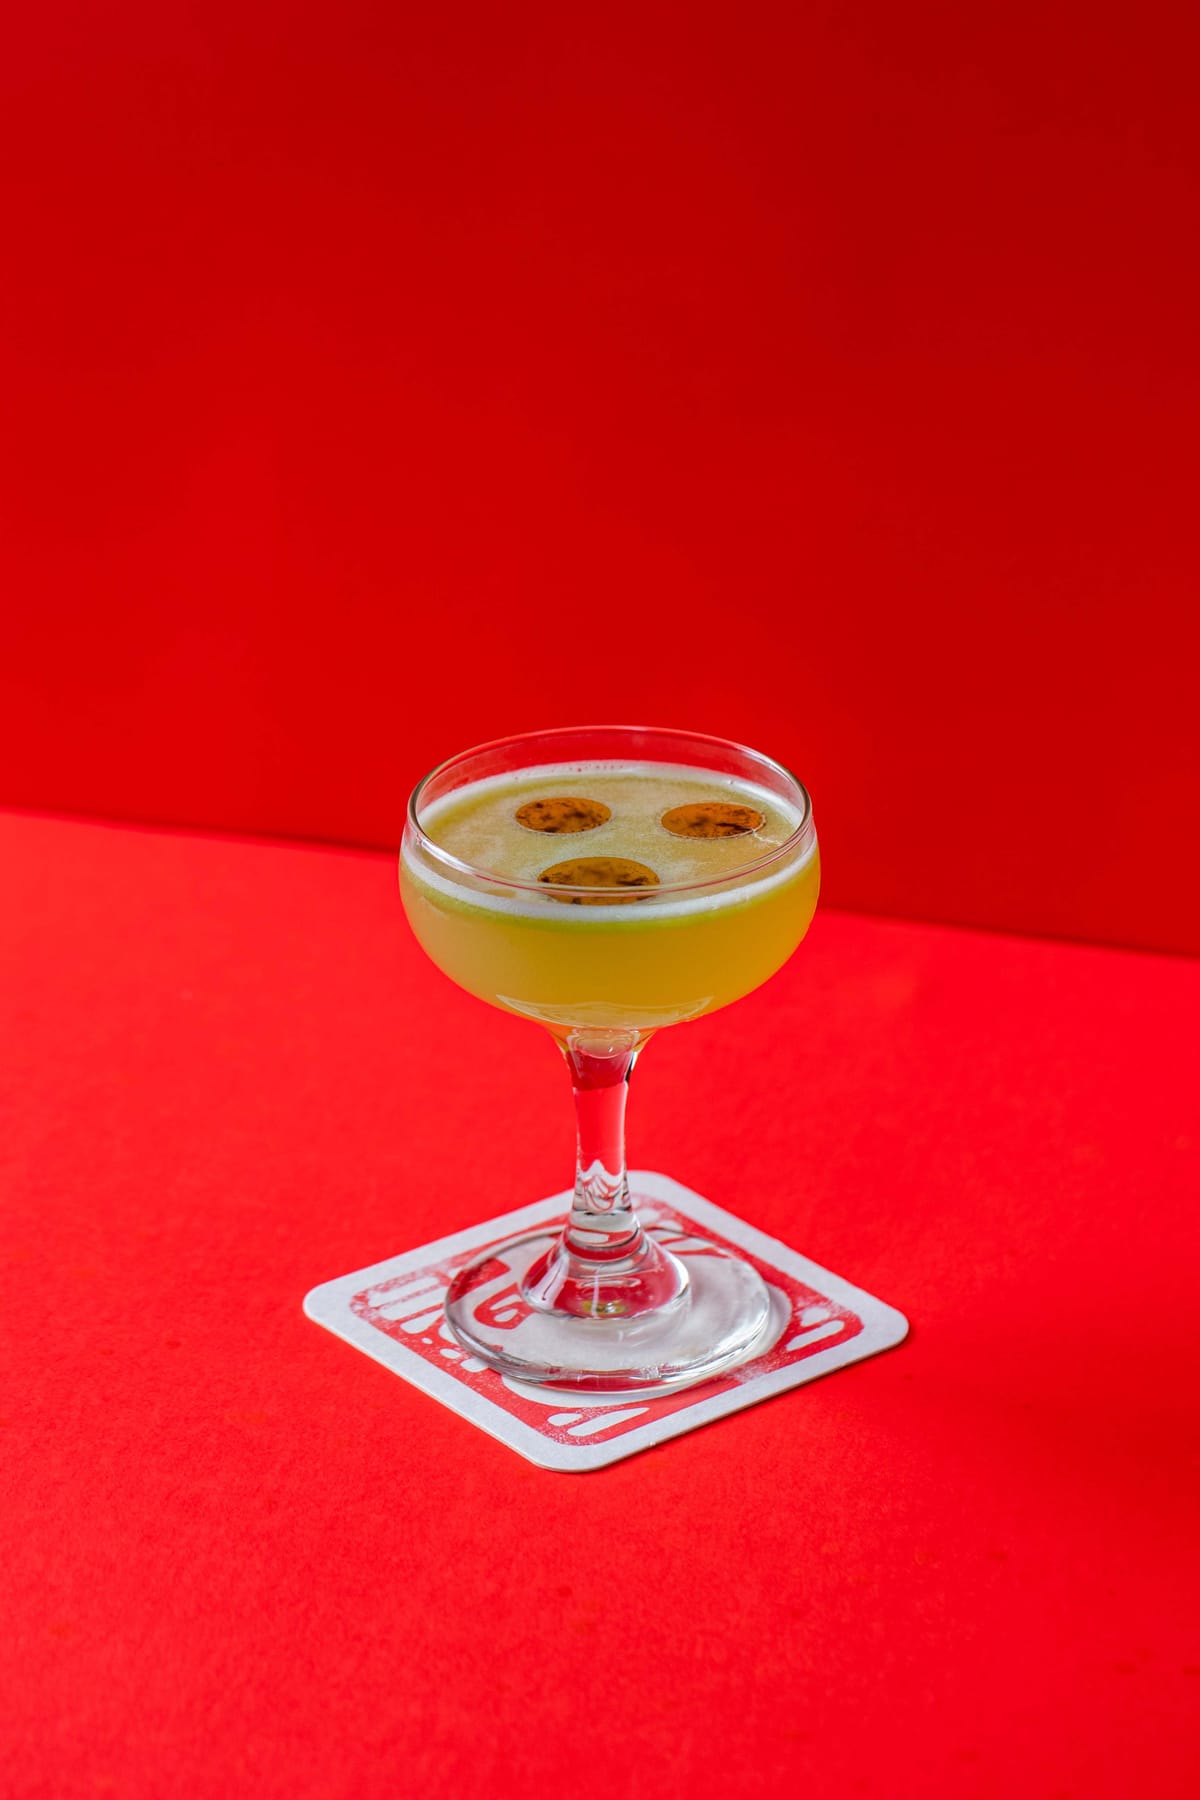 Get the recipe for Harrison Kenney's award-winning tequila cocktail, Teal